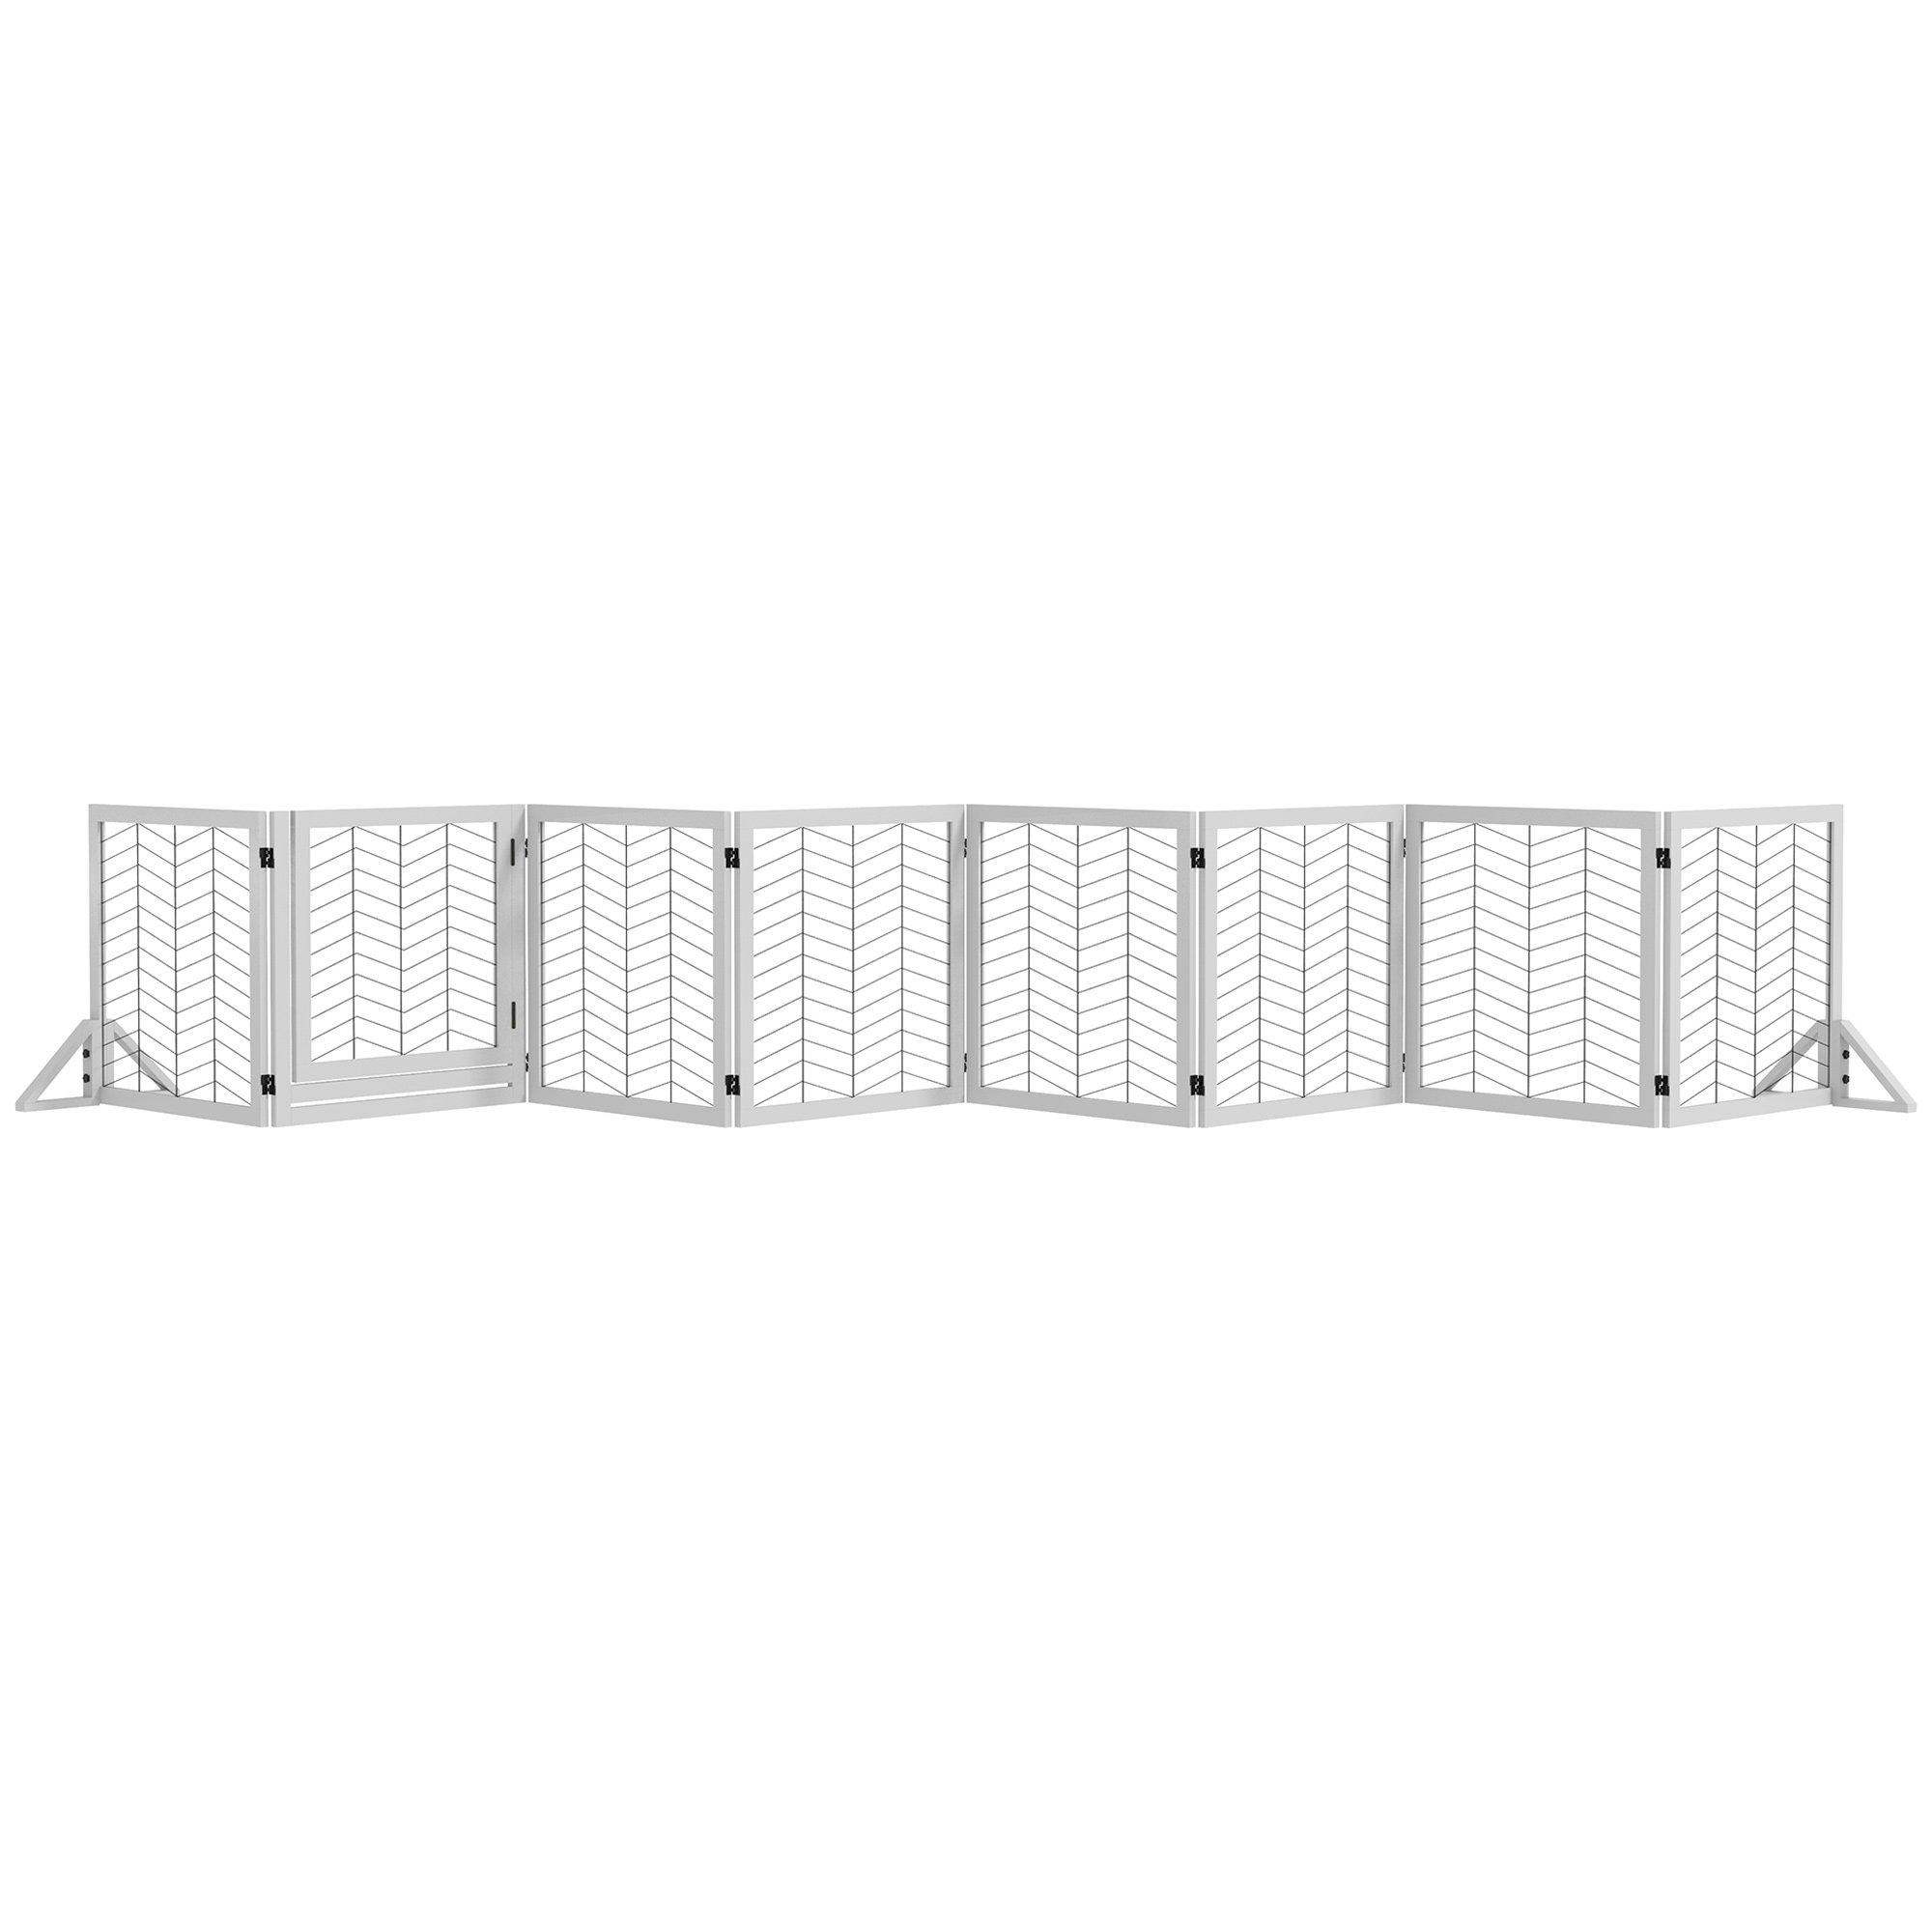 8 Panels Foldable Dog Barrier for House, Doorway, Stairs